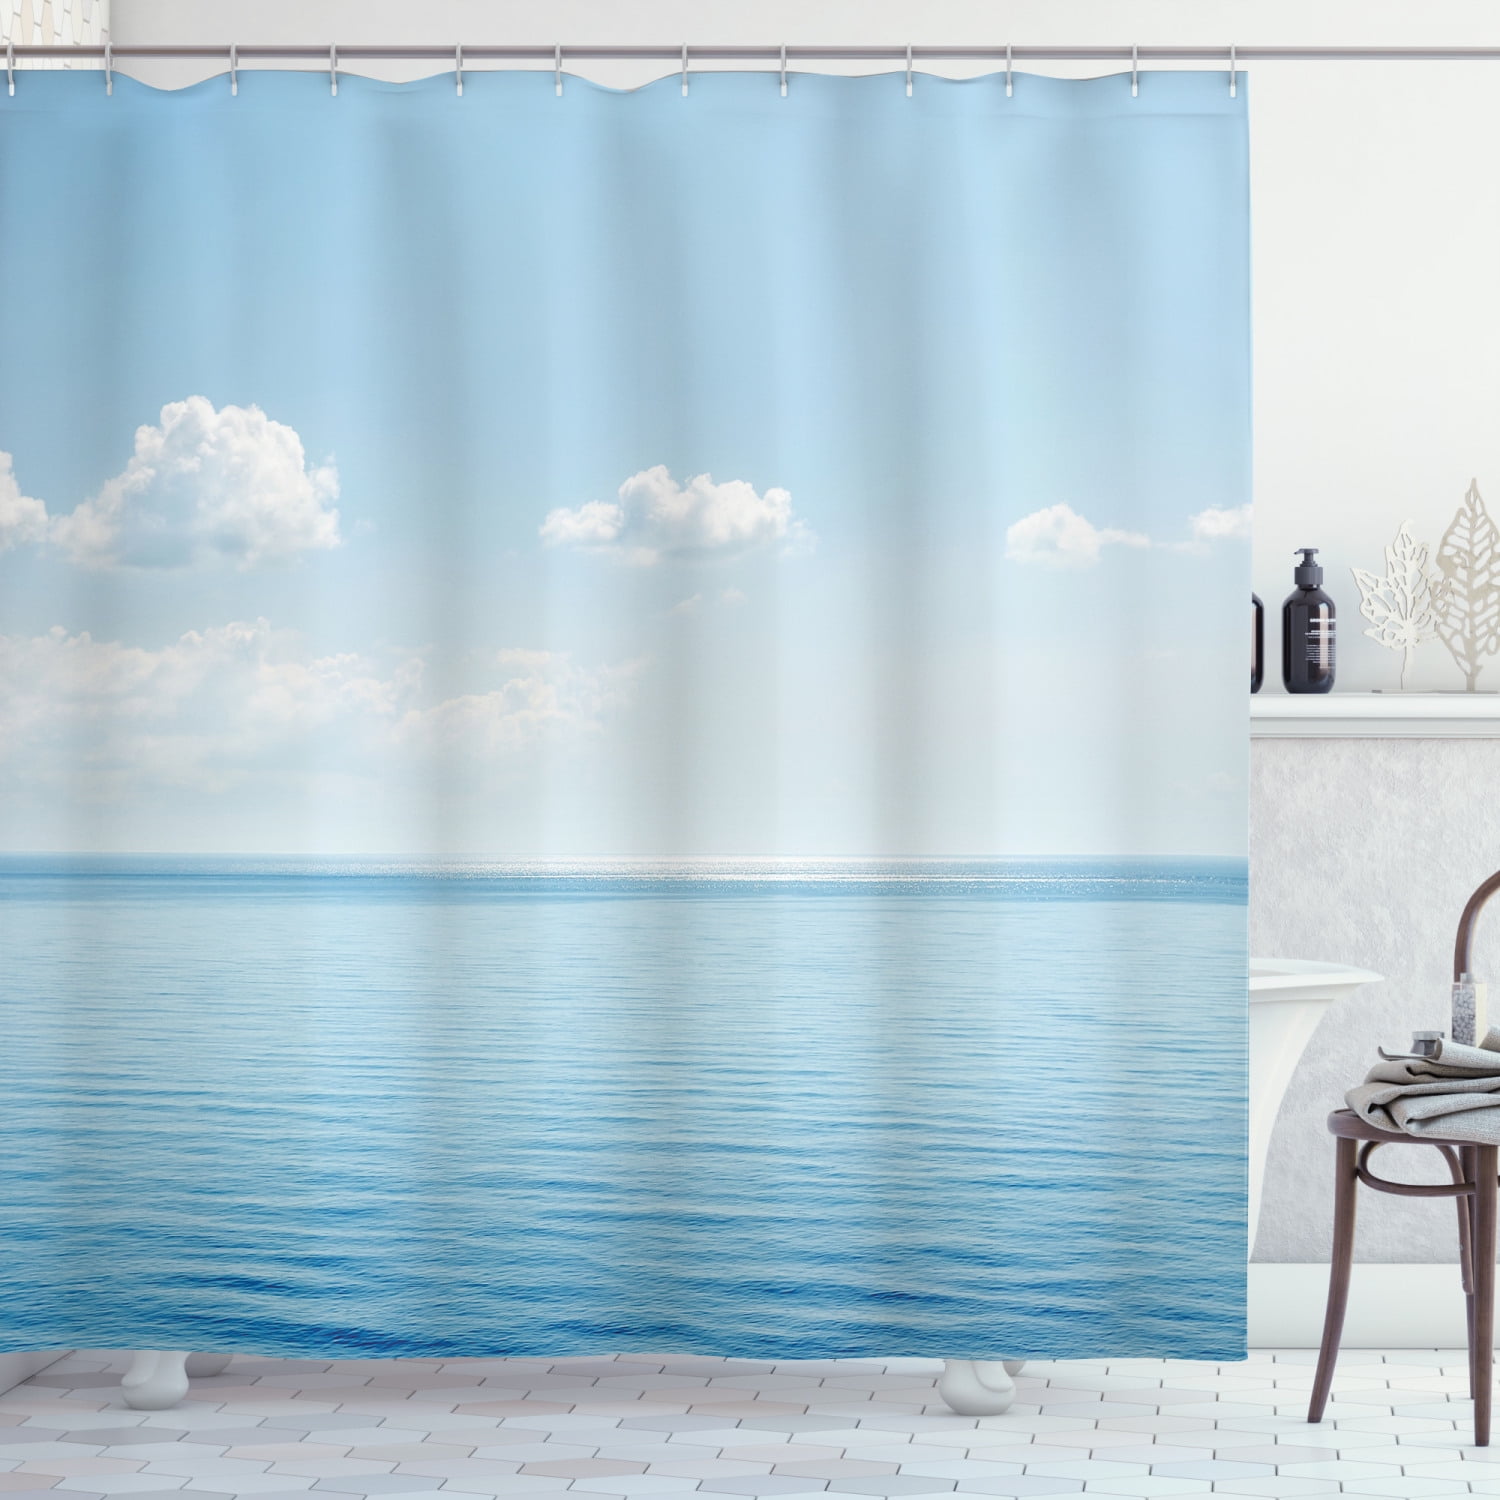 Underwater Inspiration of Narwhale Watercolor Bathroom Decor Narwhal Landscape Shower Curtain Peaceful Ocean Marine Sea Life Tropical Beach House Theme Water Resistant Fabric Curtain 71x 74 